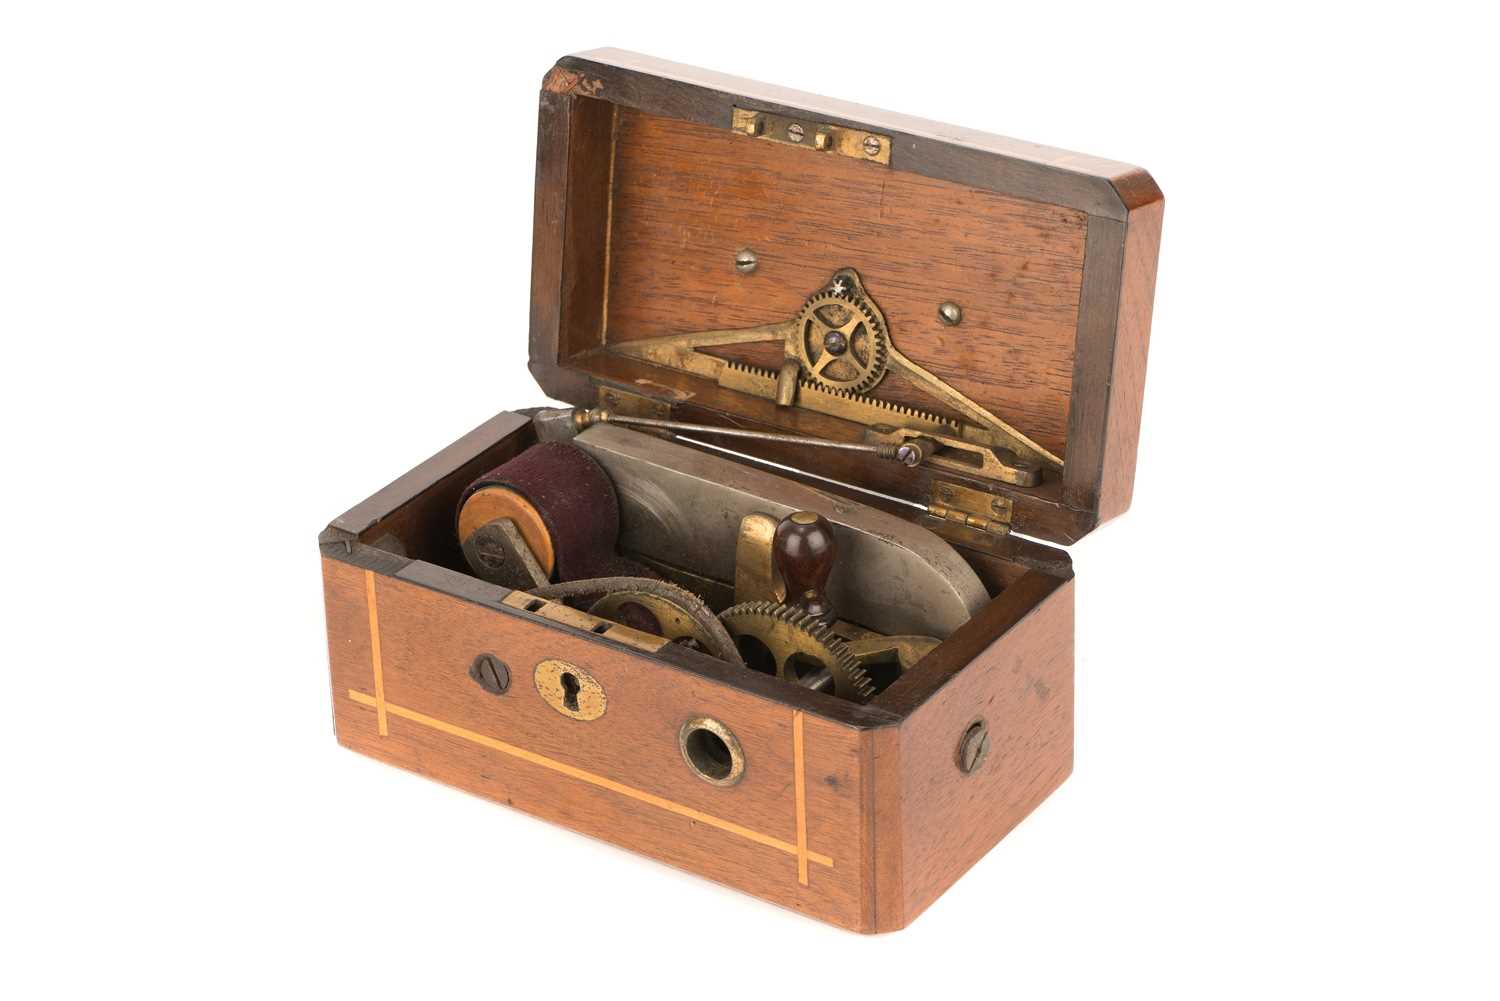 Lot 113 - A Miniature Electro-Medical Device